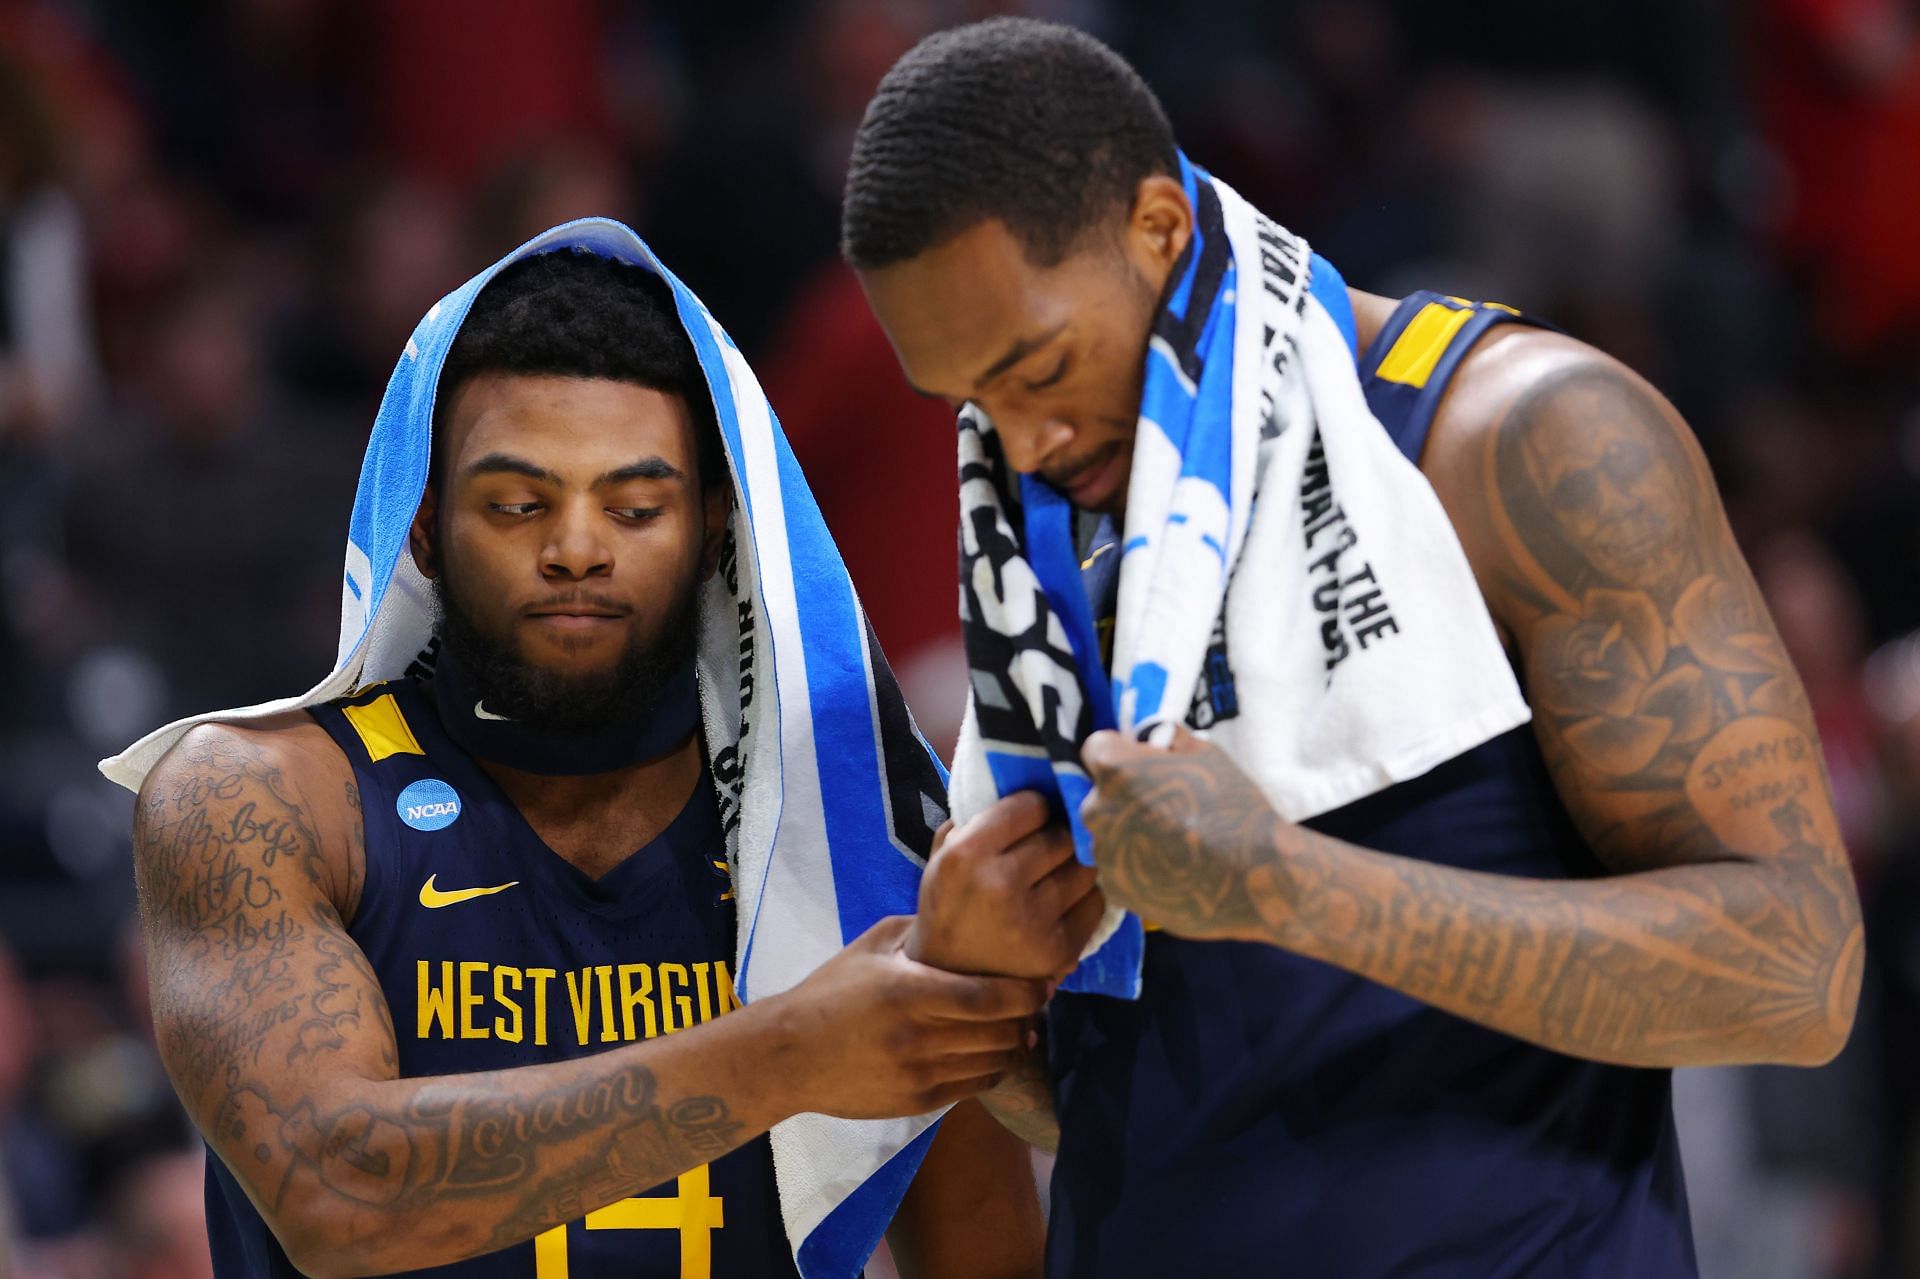 The Mountaineers lost in the first round of the 2023 NCAA Tournament (Image via Getty Images)